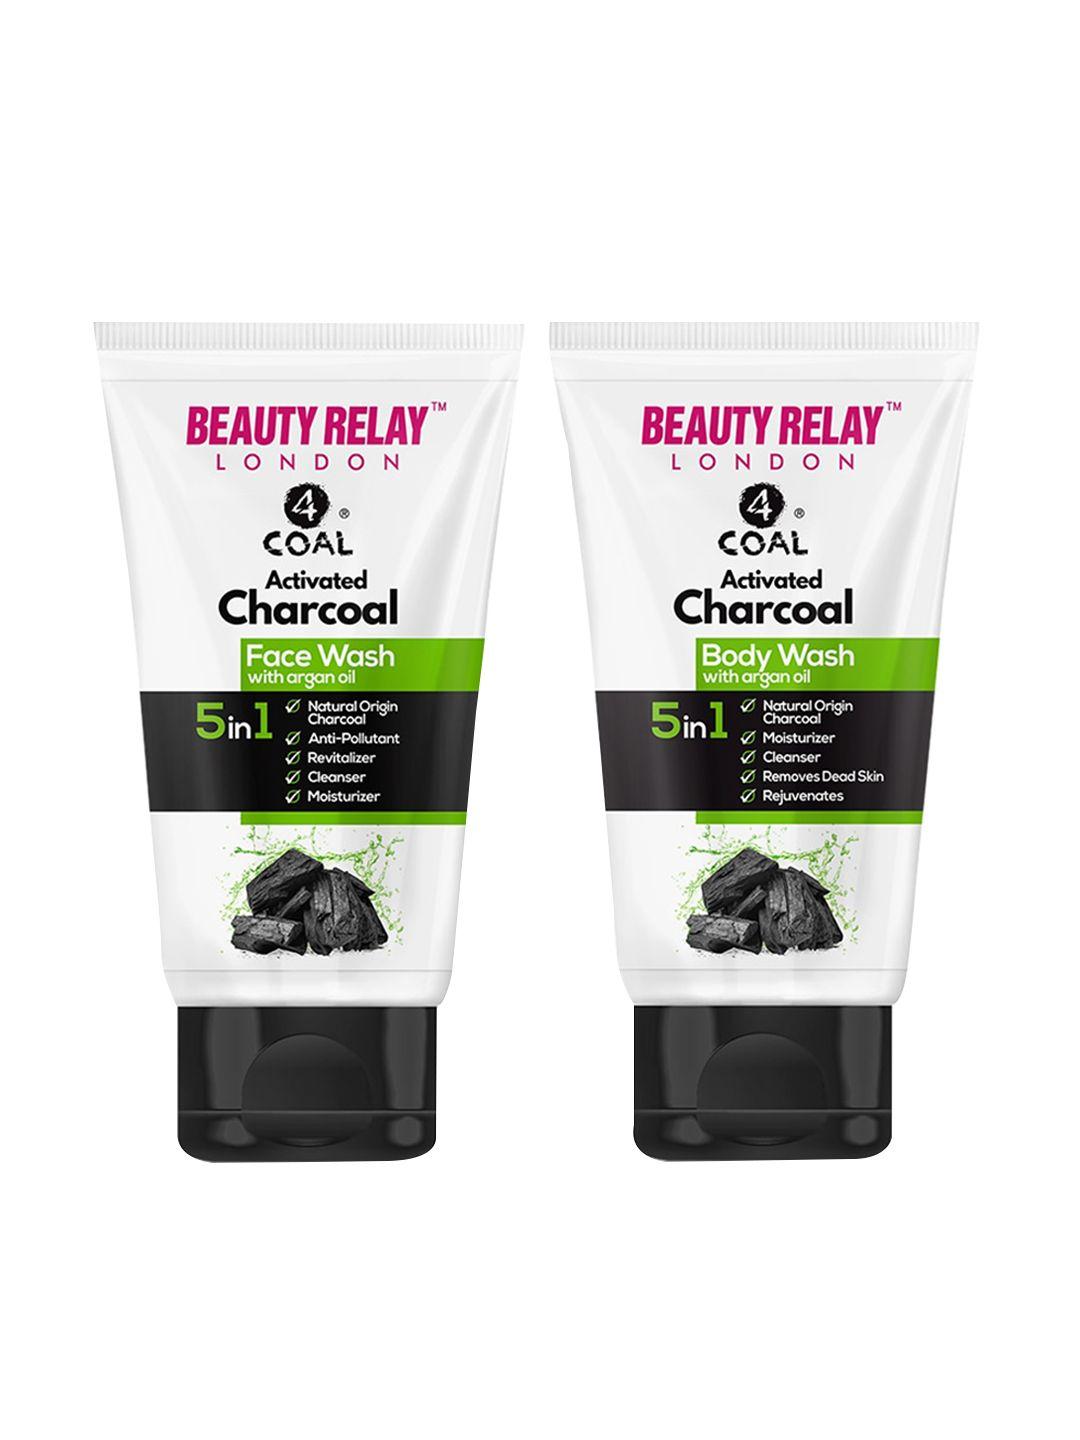 beautyrelay london 4coal activated charcoal face wash & body wash 200ml - buy 1 get 1 free